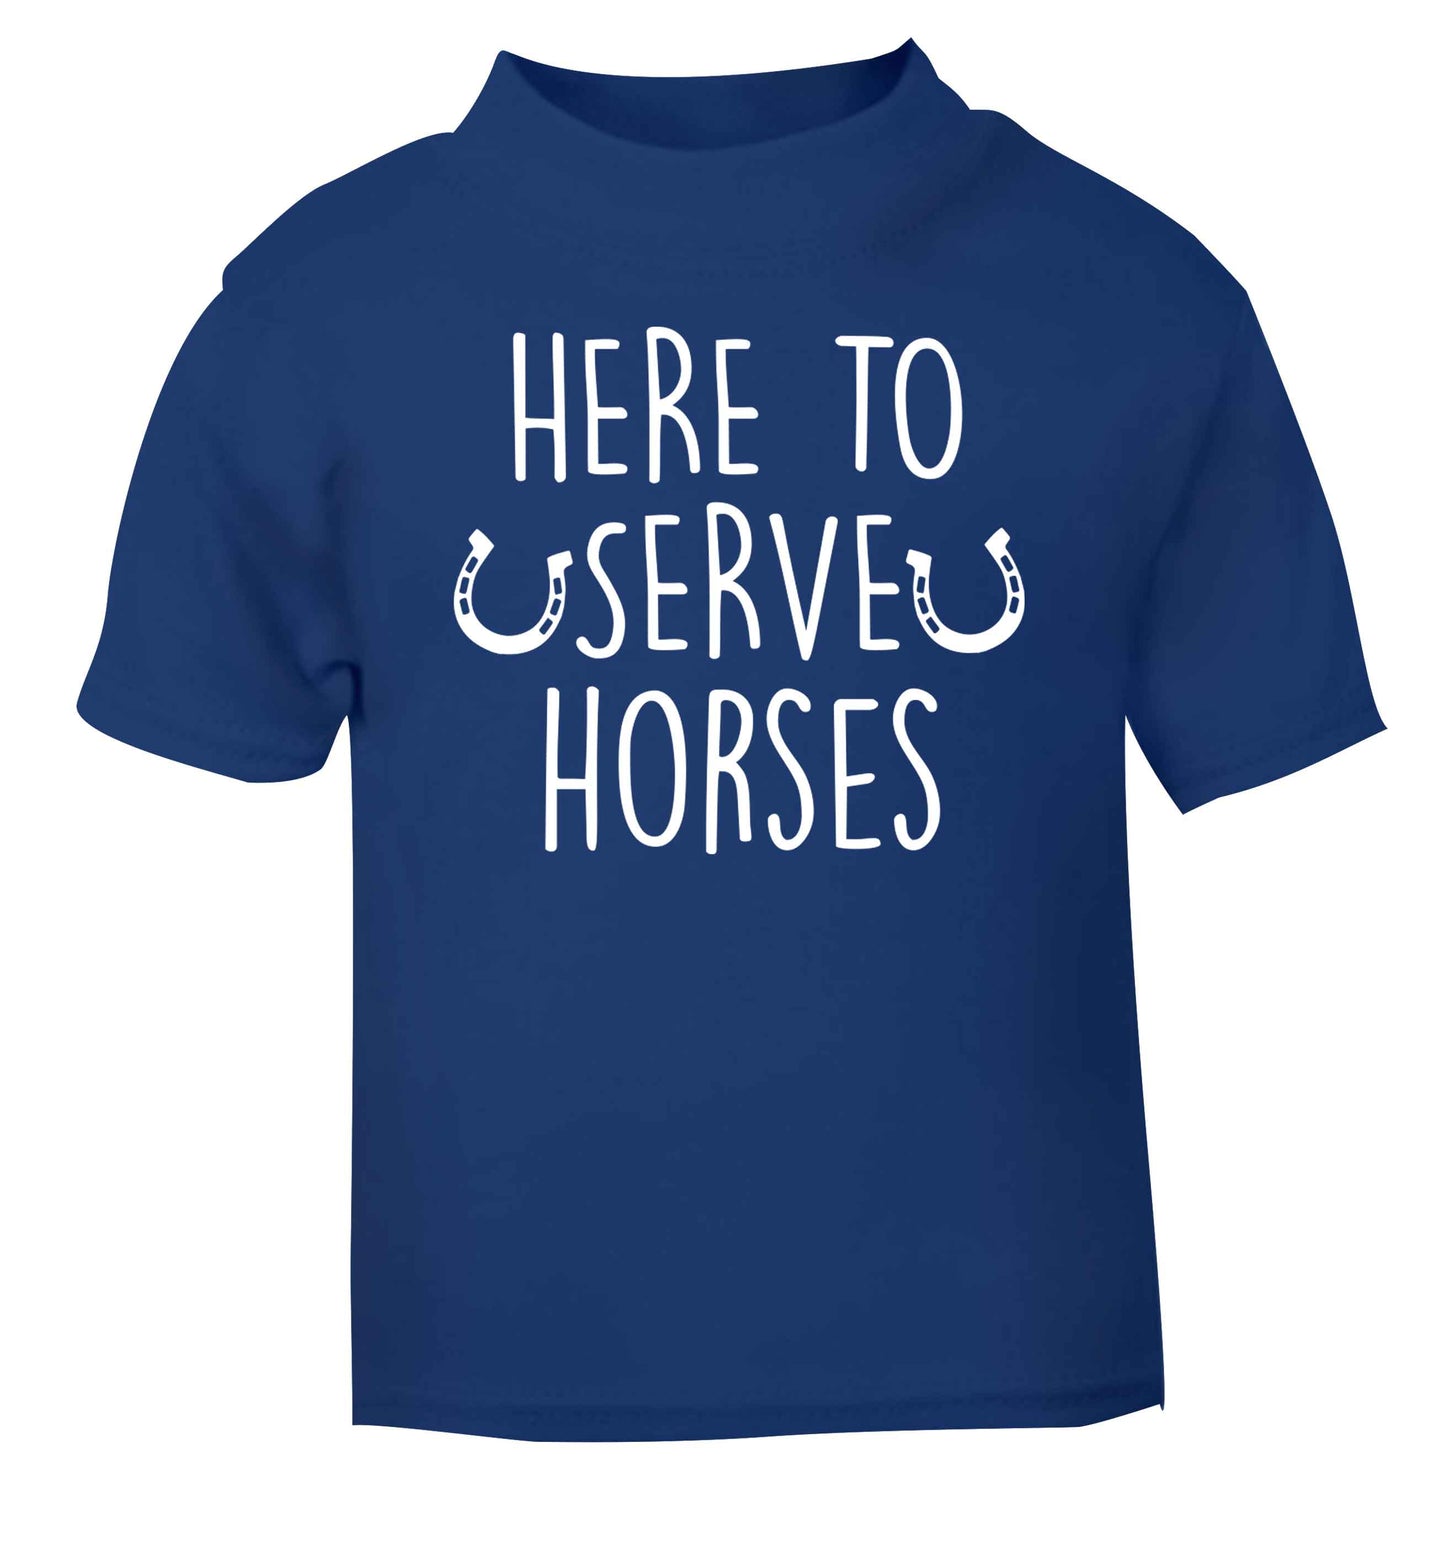 Here to serve horses blue baby toddler Tshirt 2 Years